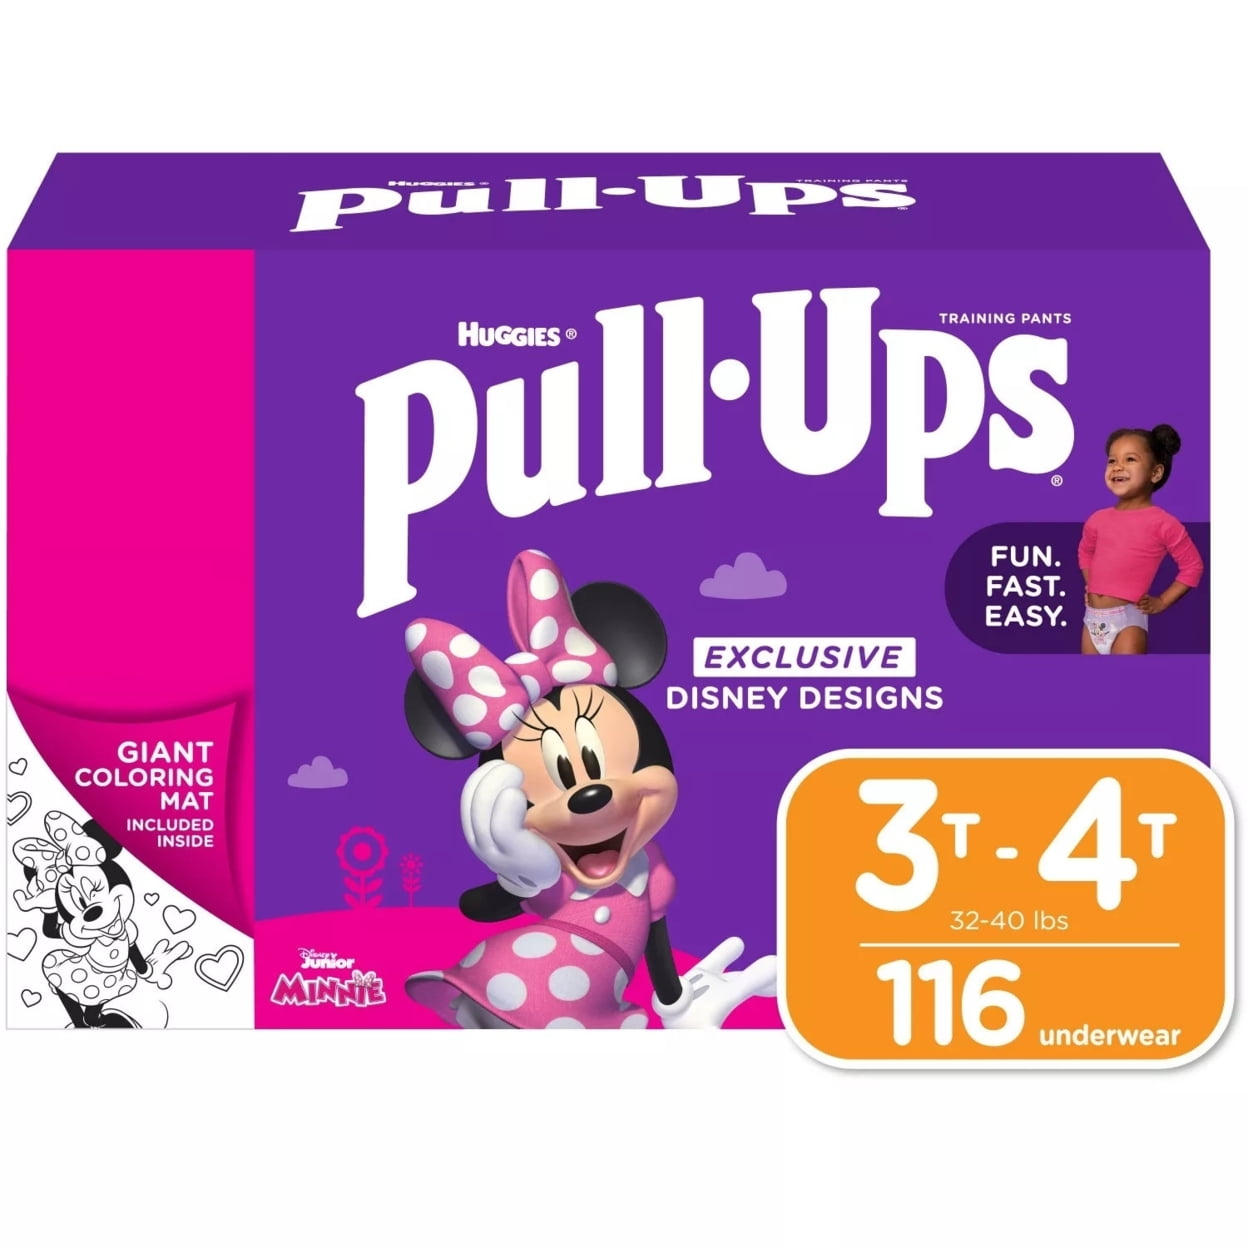 Huggies Pull-Ups Potty Training Pants for Girls 3T-4T 32-40 Pounds